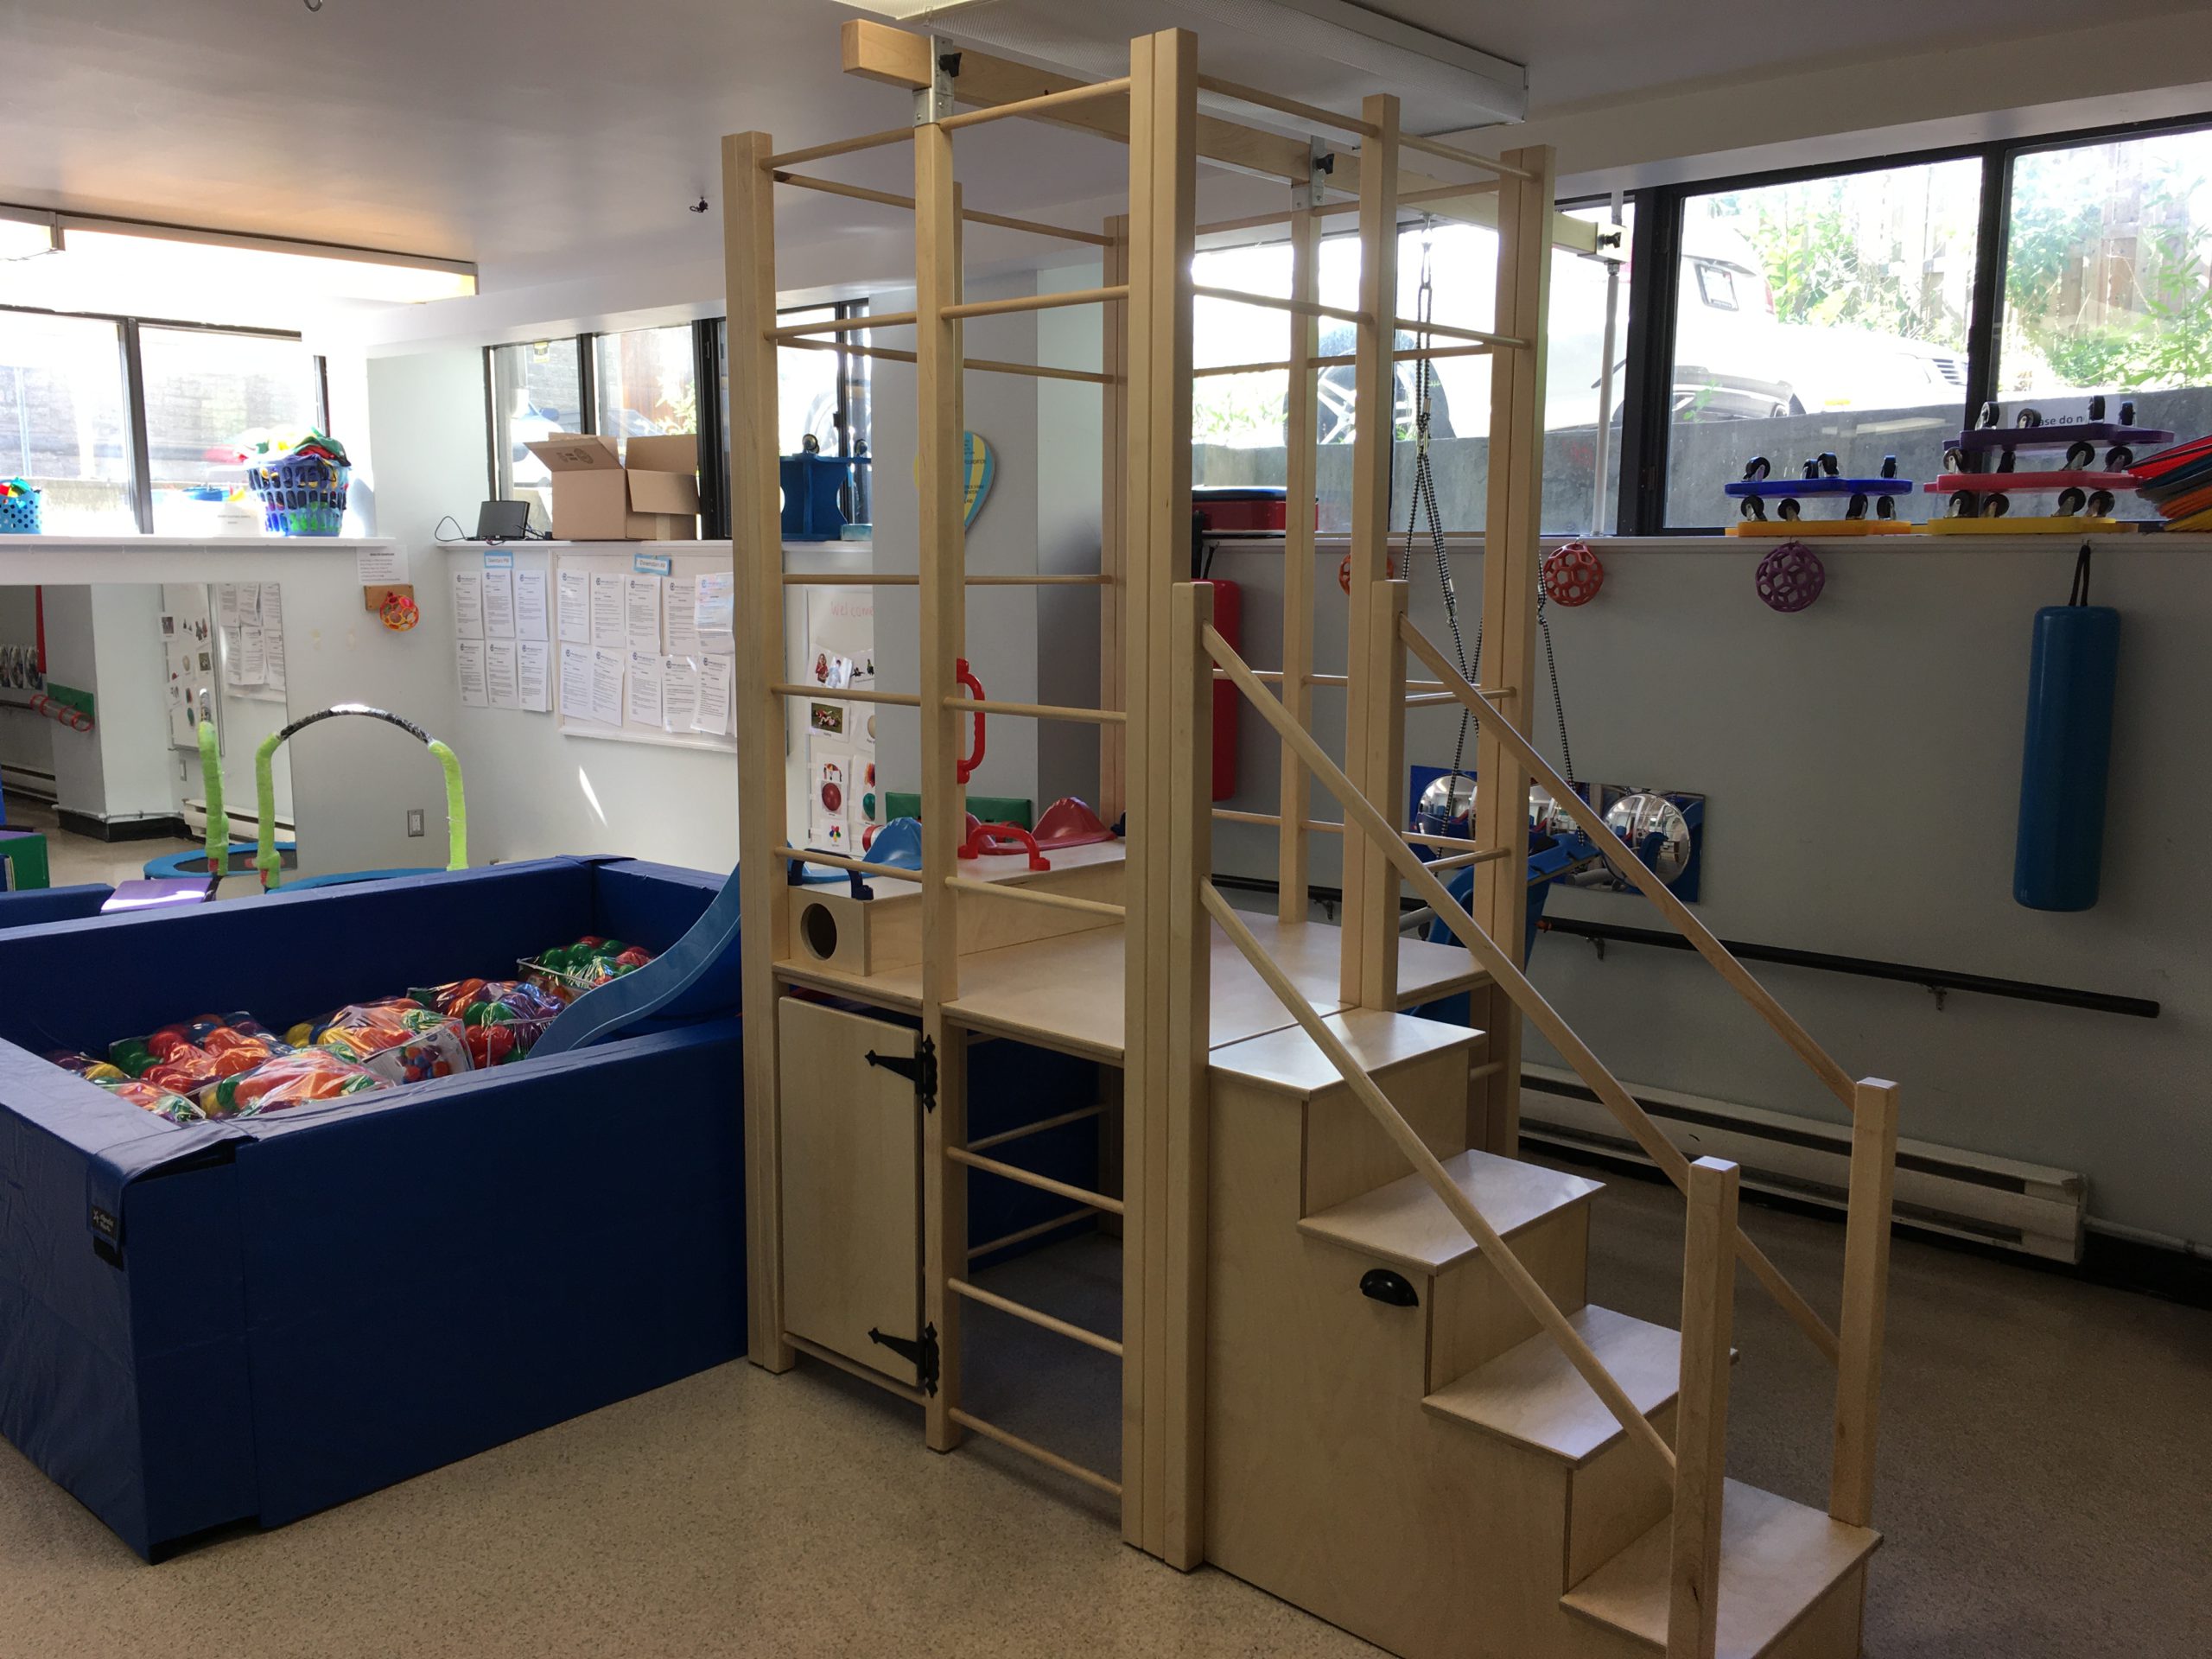 Children's play apparatus designed by Ron for Centennial Infant & Child Care.